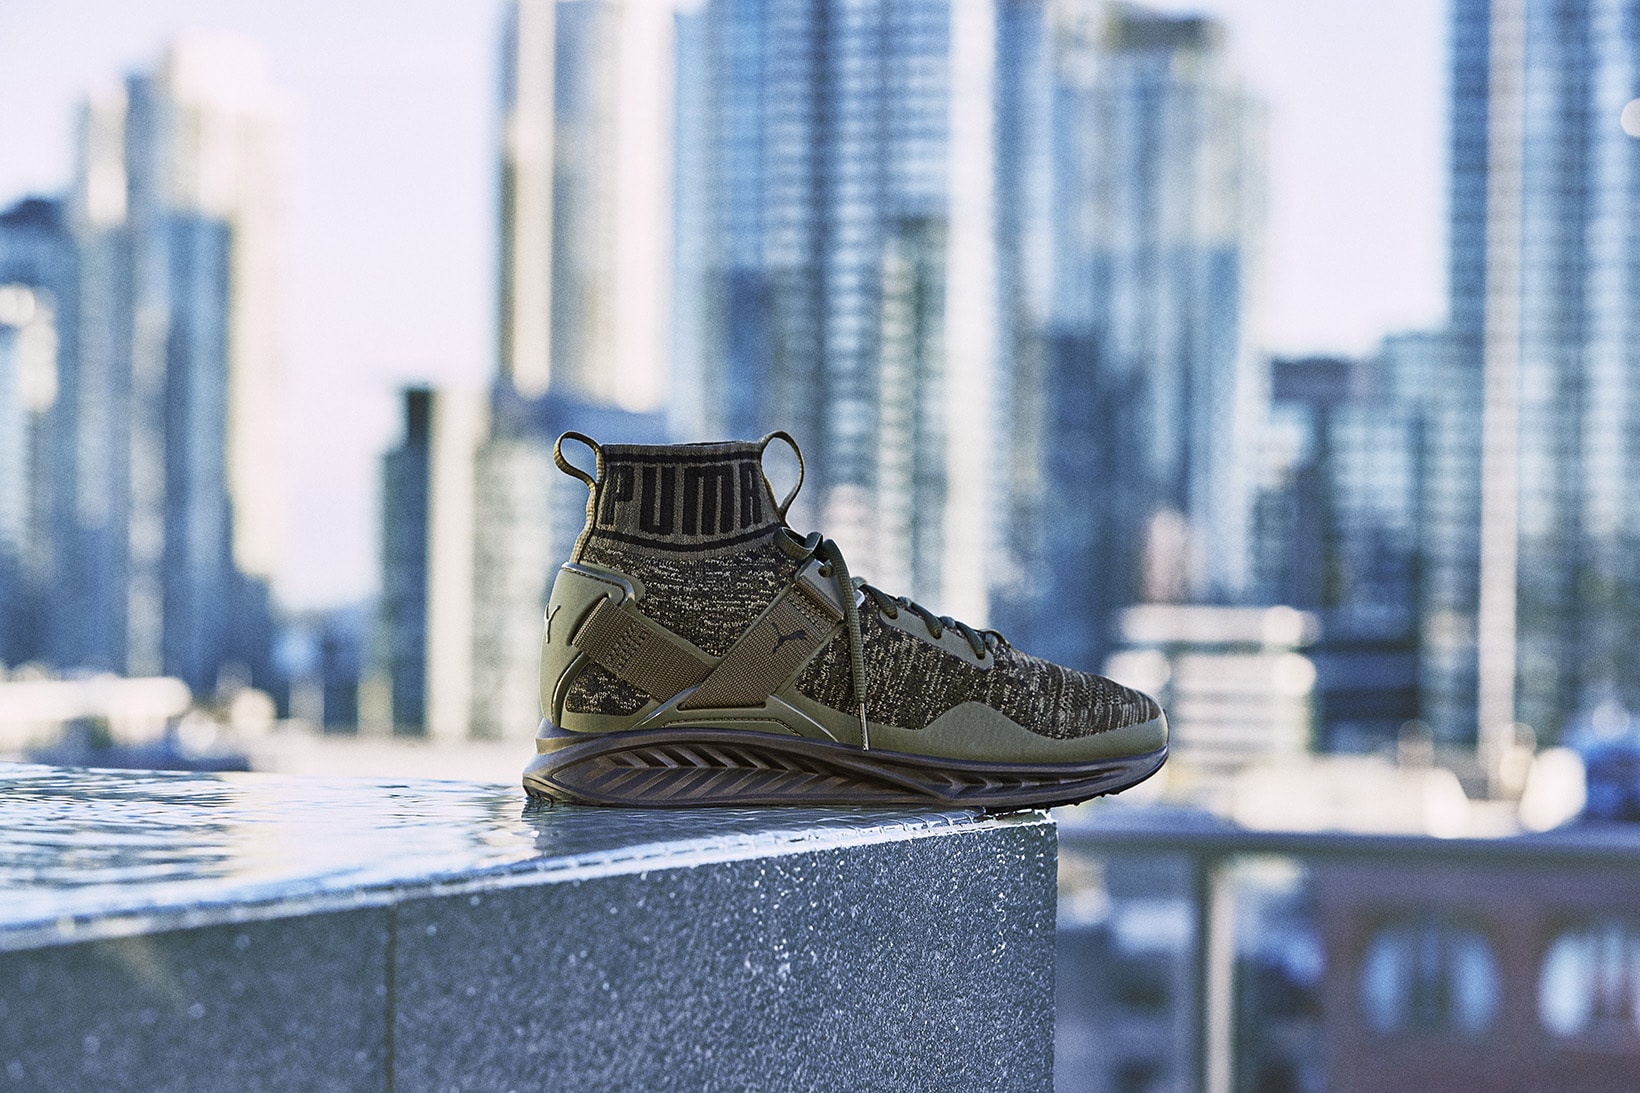 The Weeknd & PUMA Unveil the IGNITE evoKNIT in Olive and |